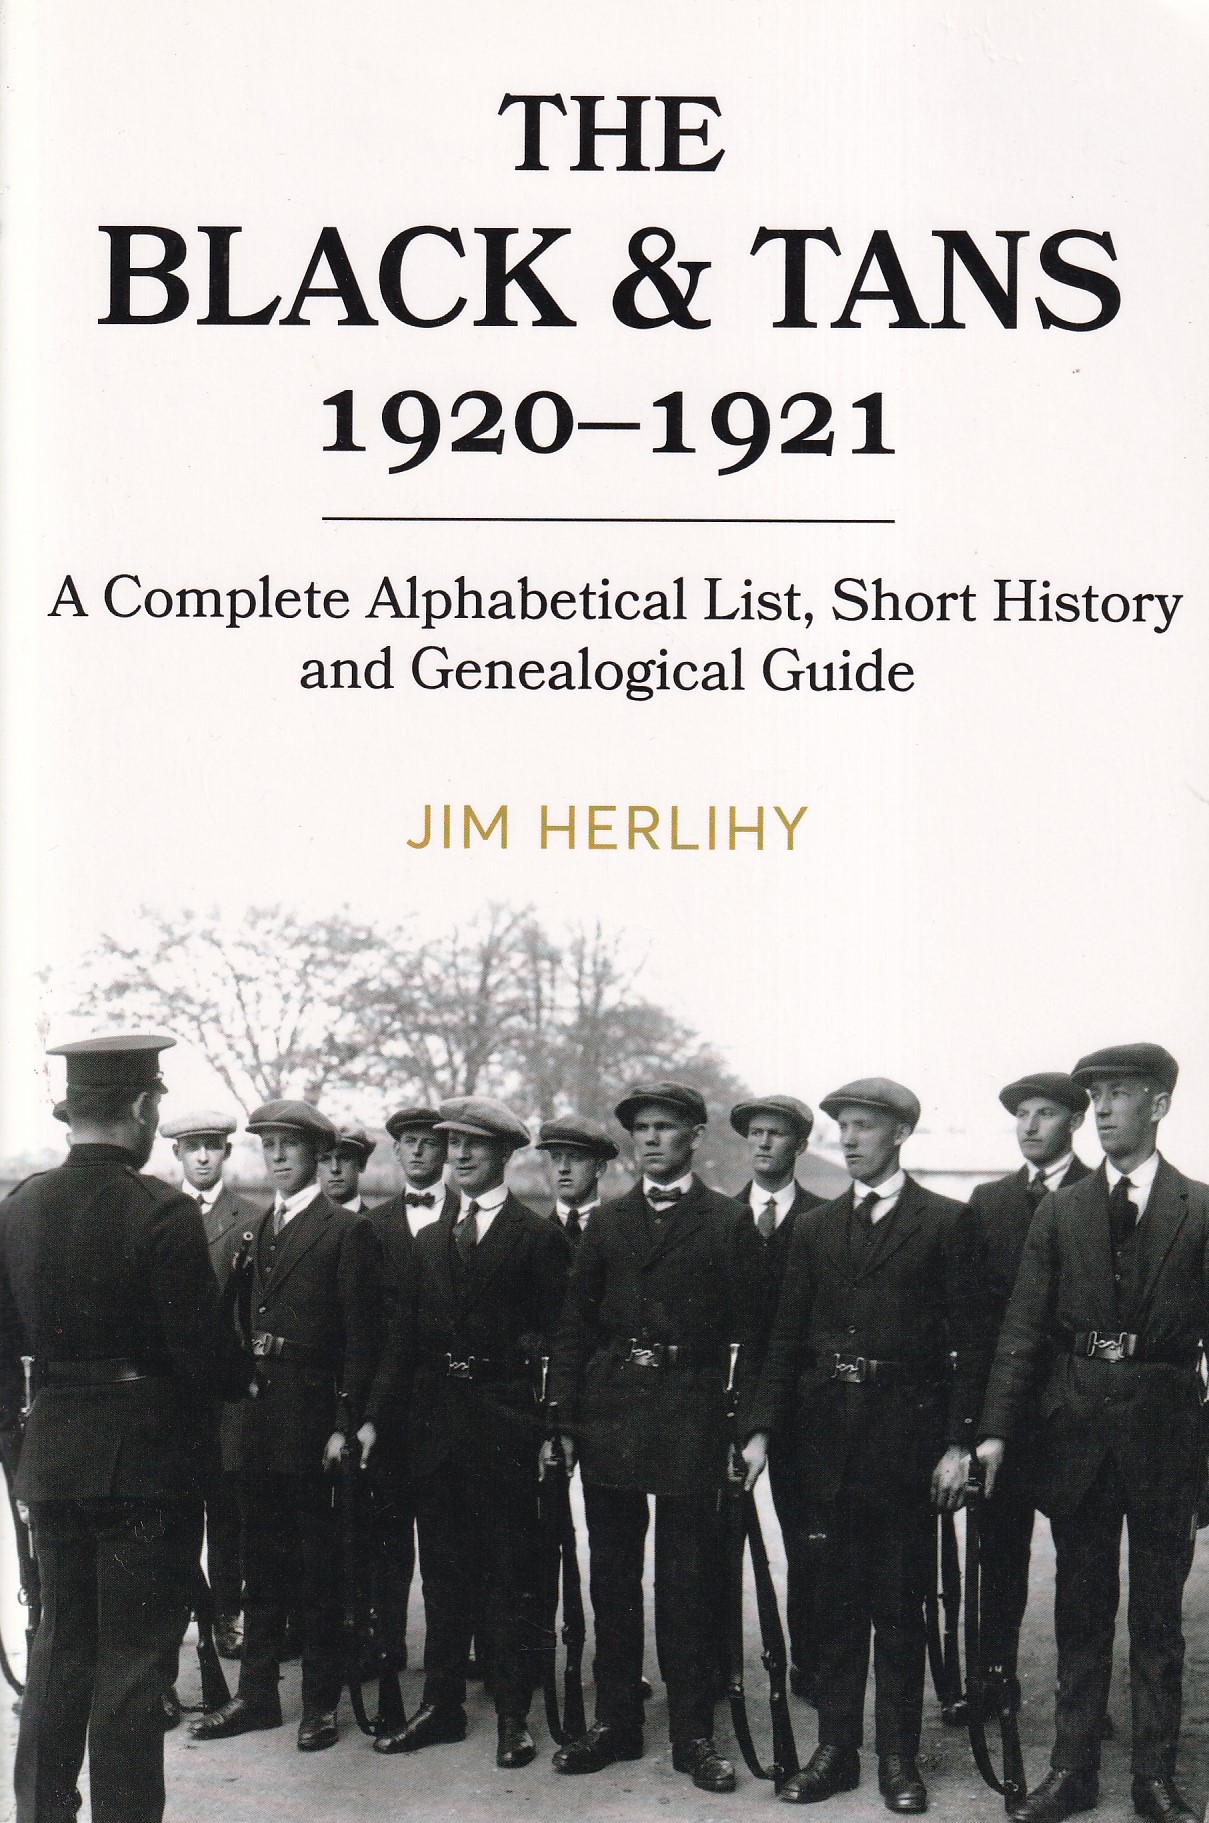 Black & Tans, 1920-1921 : A Complete Alphabetical List, Short History and Genealogical Guide by Jim Herlihy